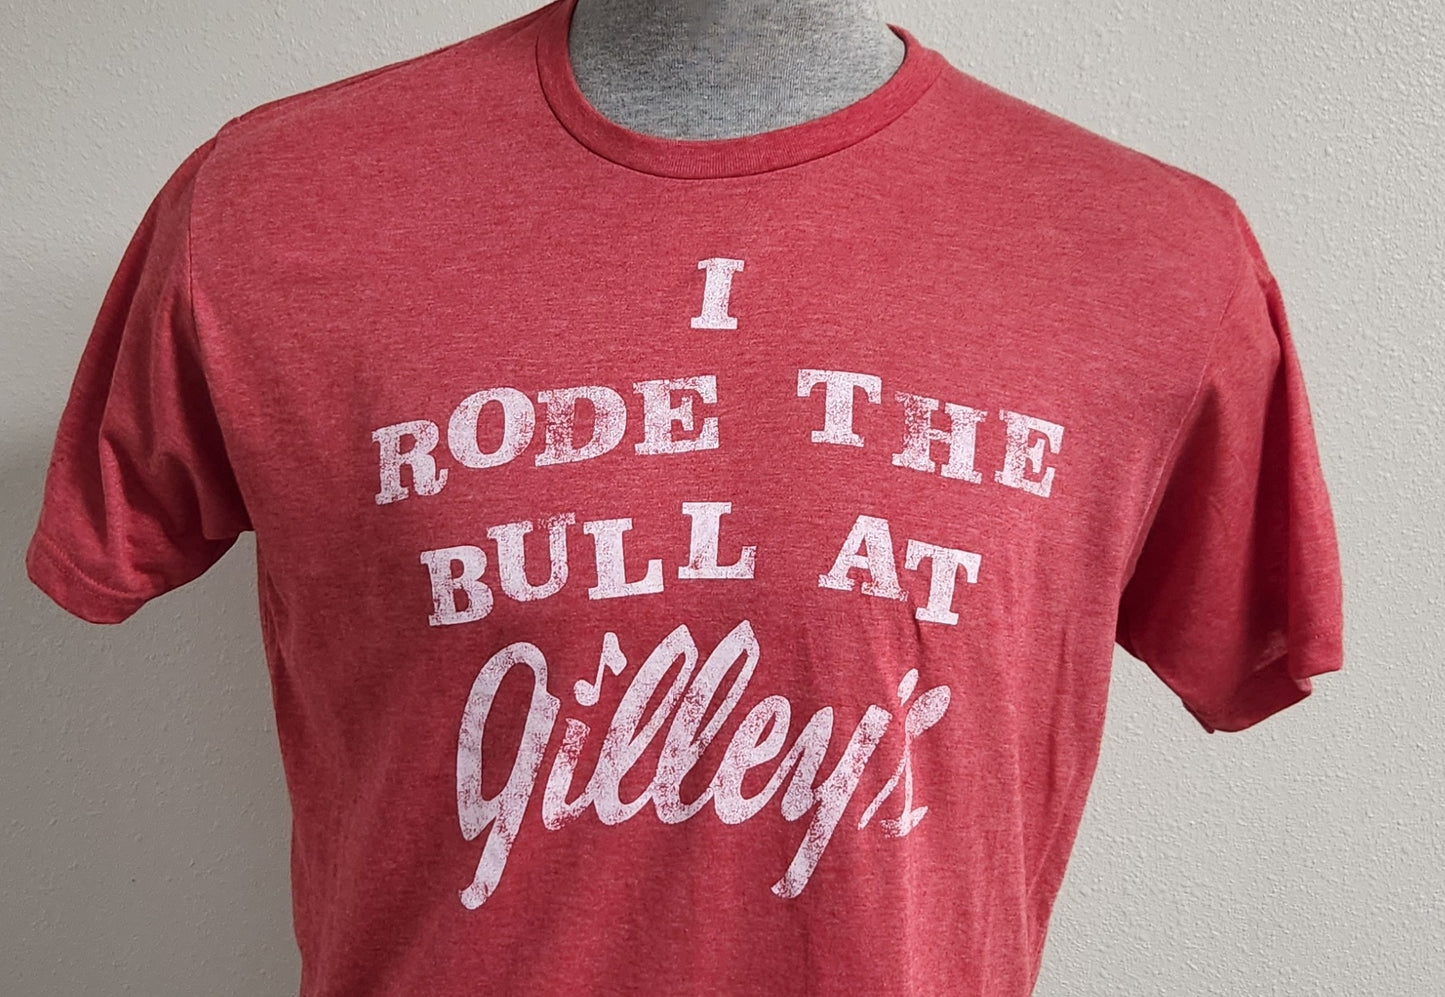 I Rode The Bull At Gilley's Shirt